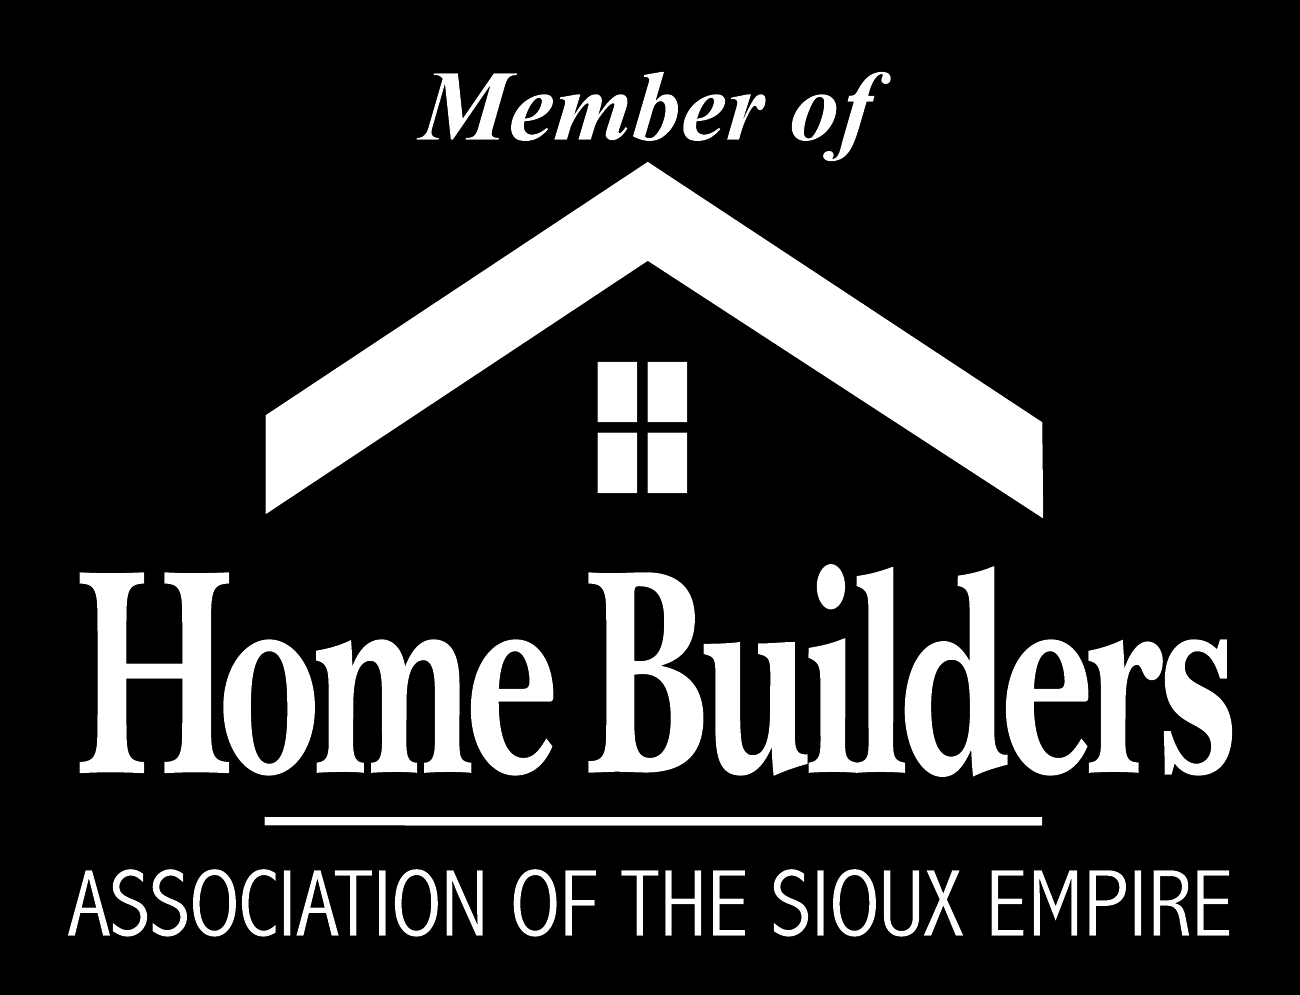 Other Web Logo - HBASE Logo Builders Association of the Sioux Empire